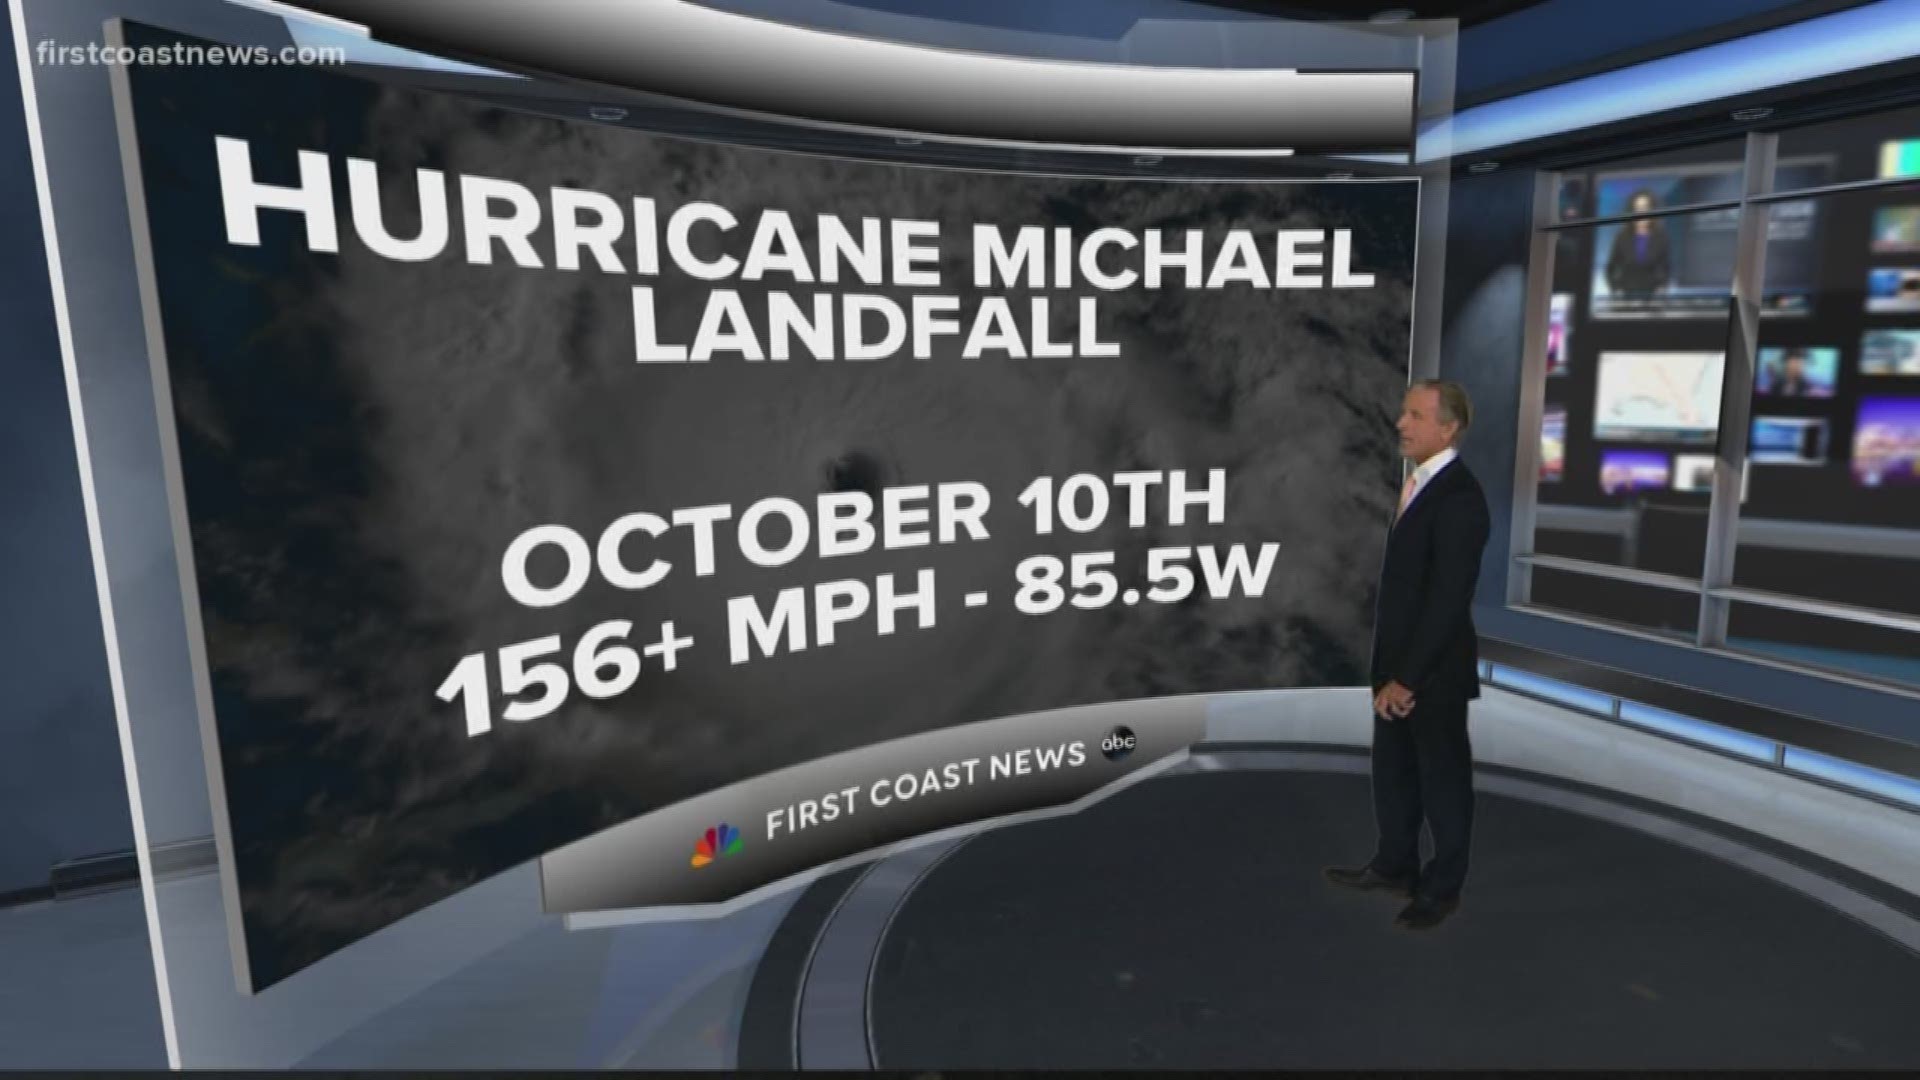 Hurricane Michael was the strongest hurricane on record to make landfall in the Florida Panhandle.